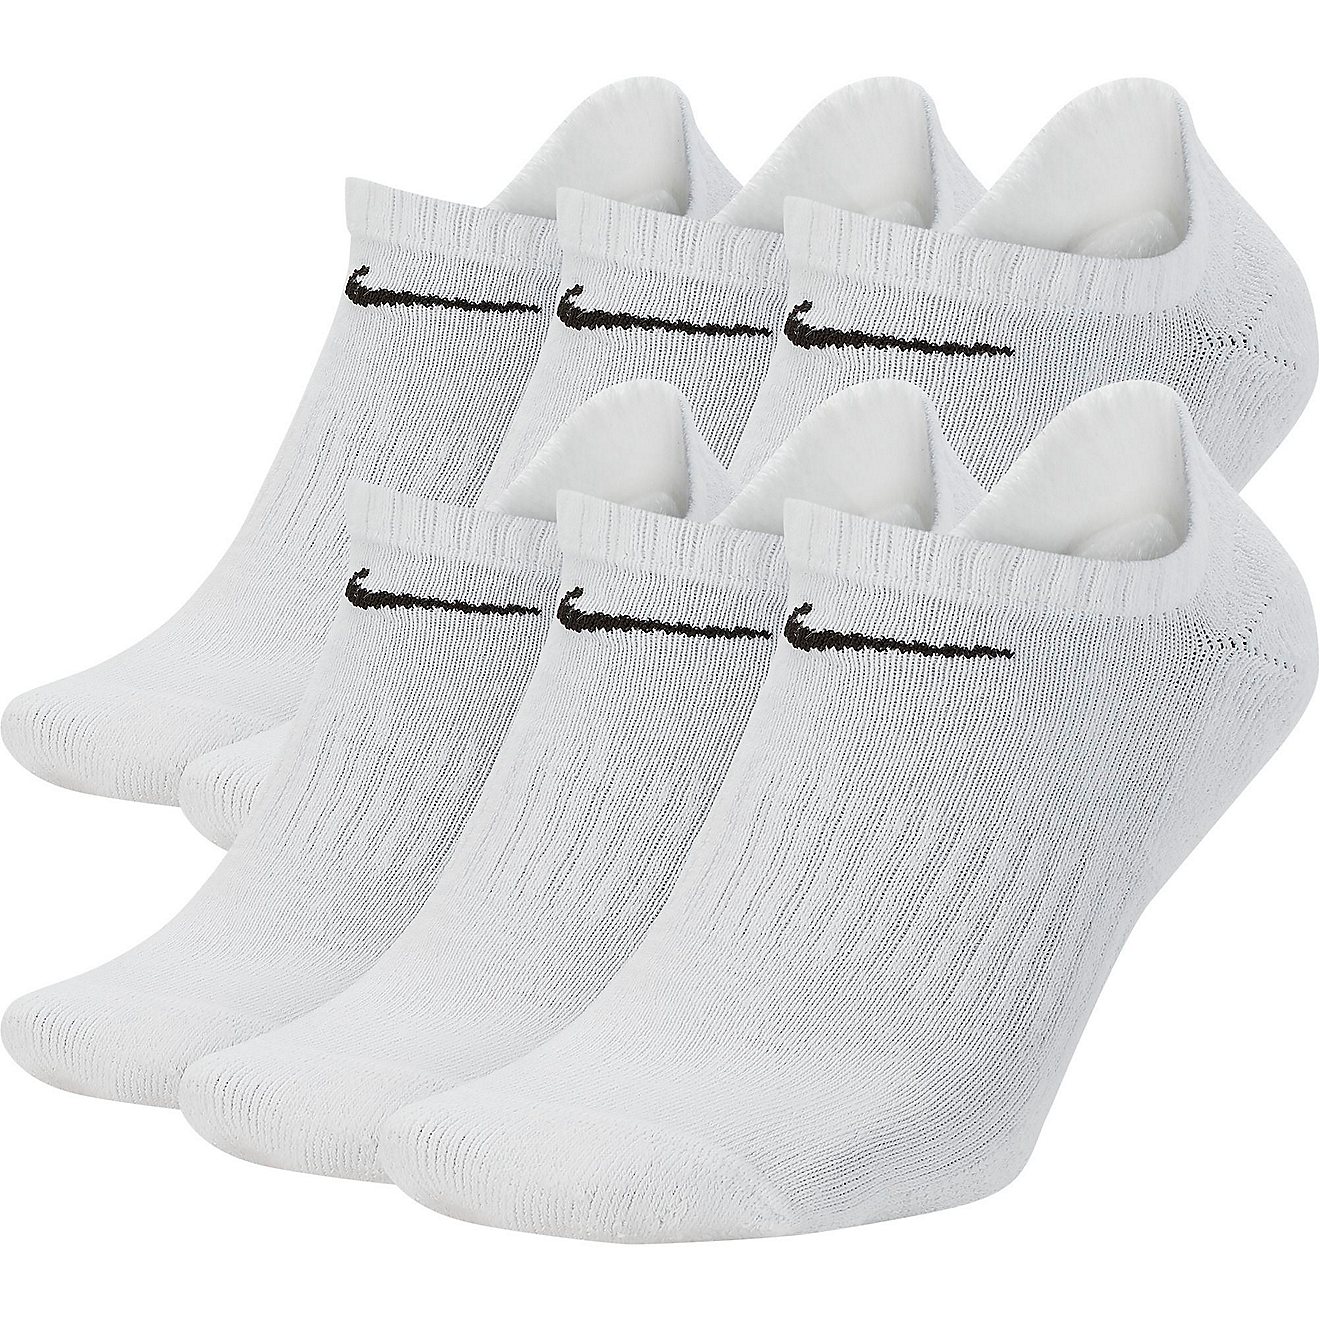 Nike Men's Everyday Cushion No-Show Socks 6 Pack                                                                                 - view number 1